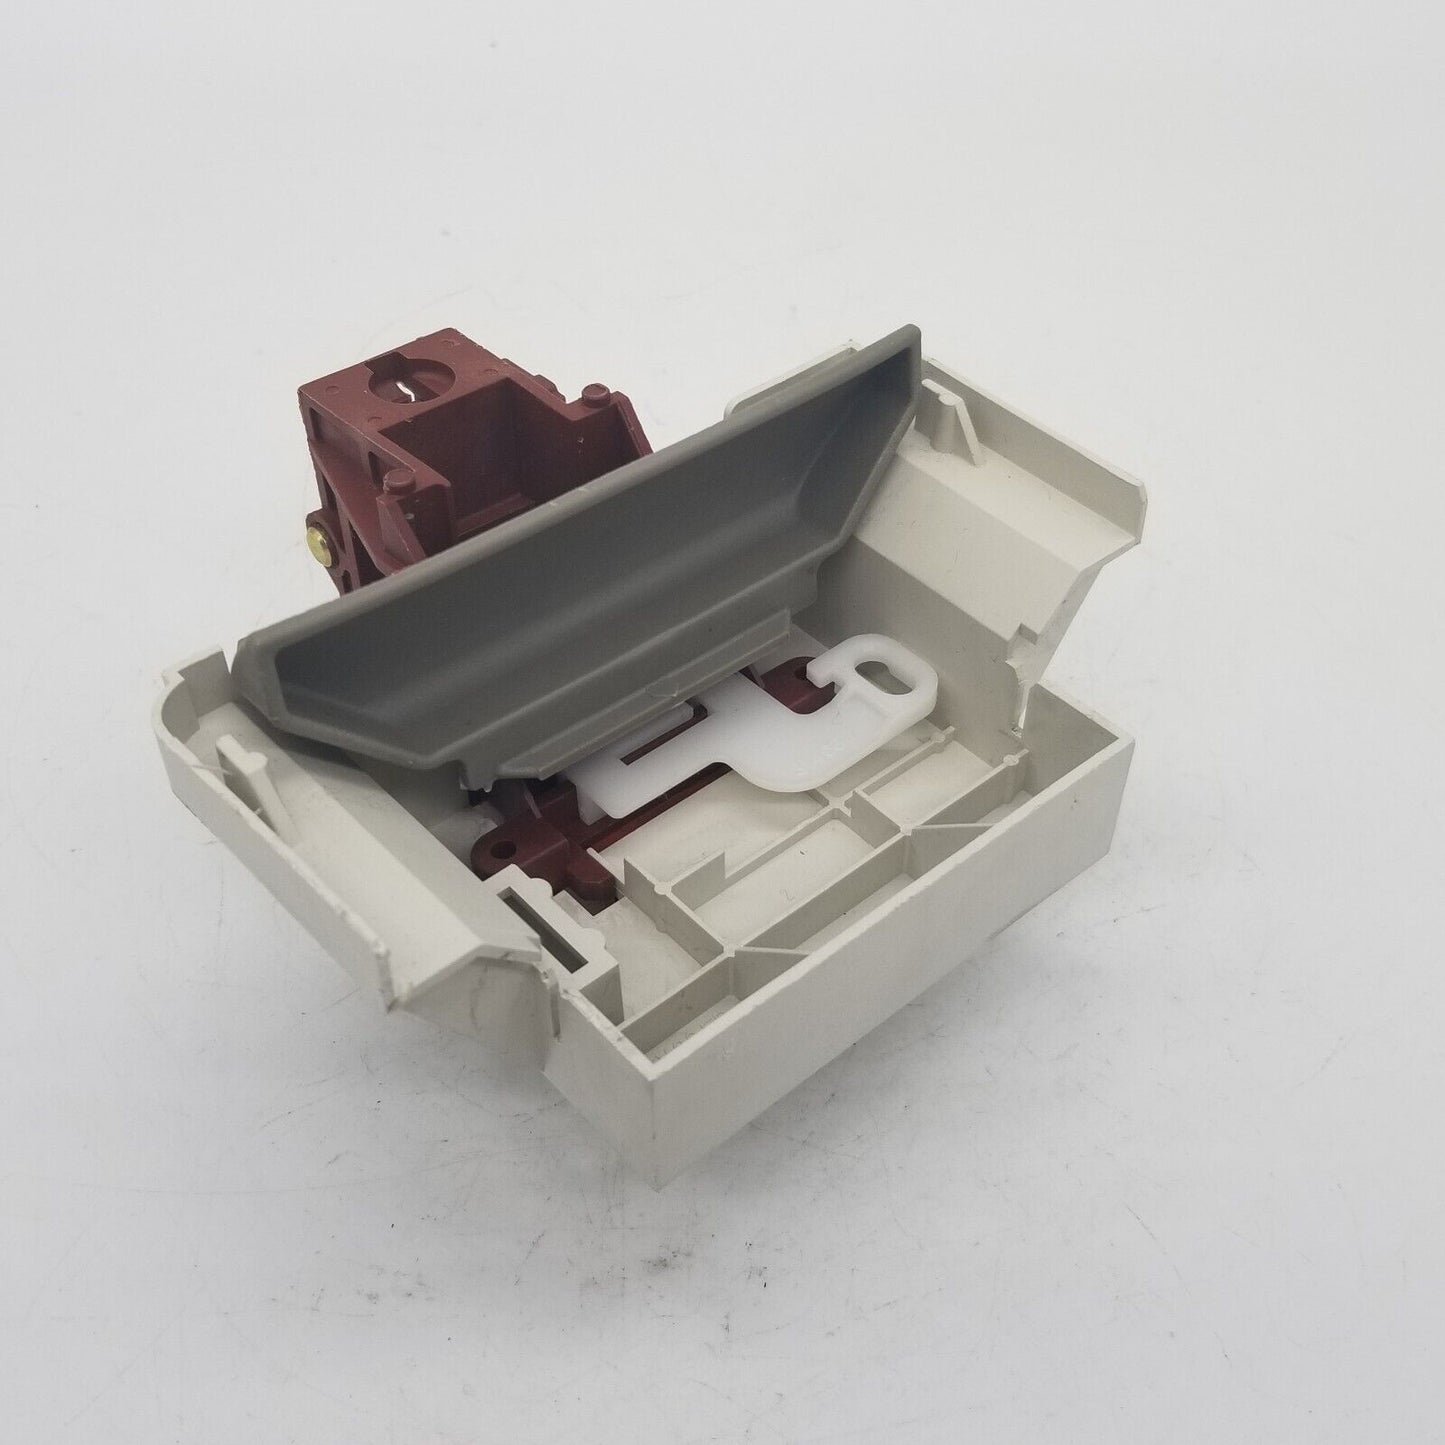 Genuine OEM Replacement for Miele Dishwasher Door Latch 4916661